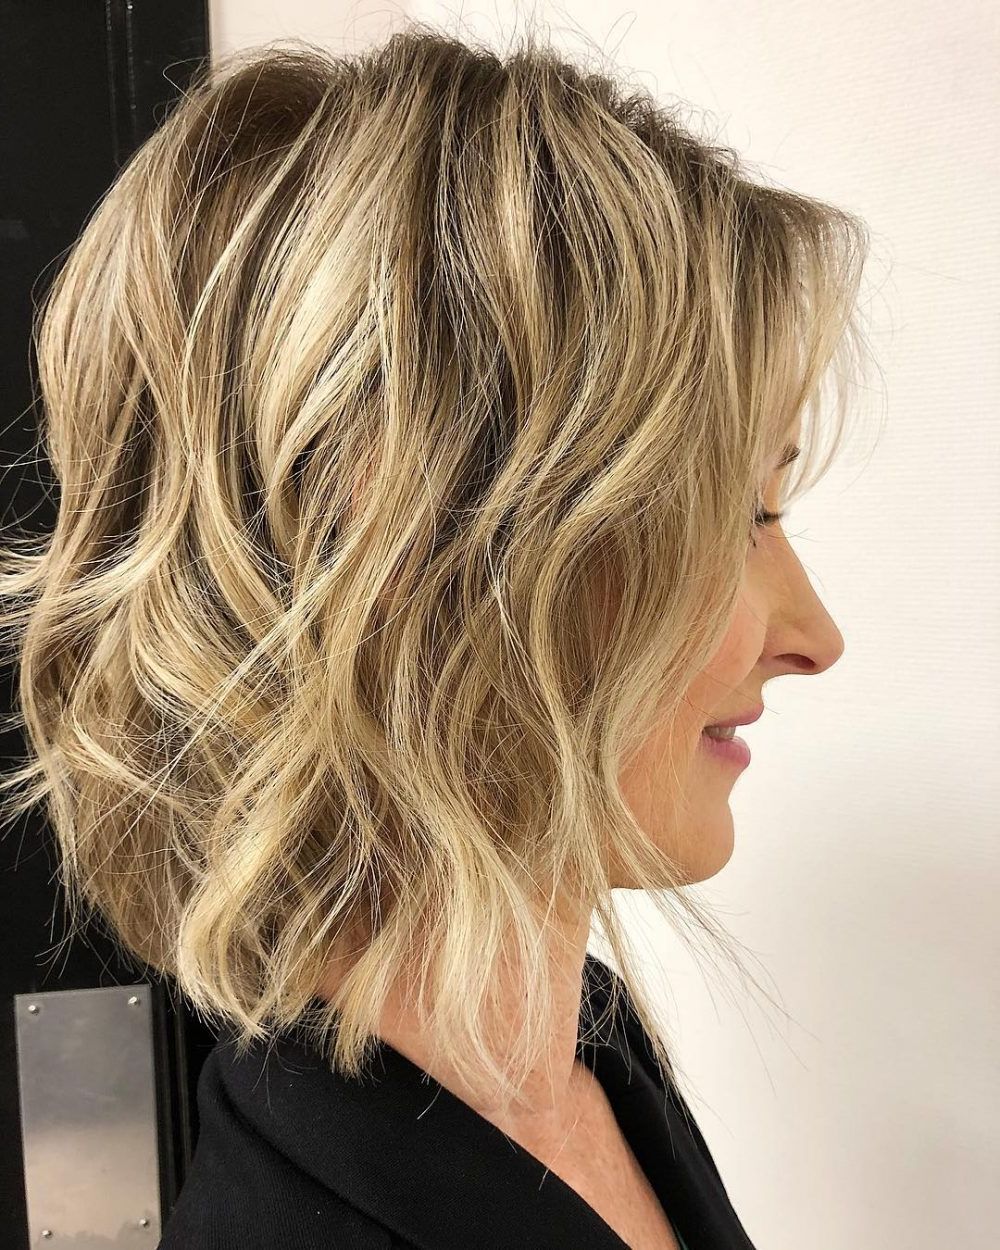 43 Perfect Short Hairstyles For Fine Hair In 2018 Throughout Semi Short Layered Haircuts (View 4 of 25)